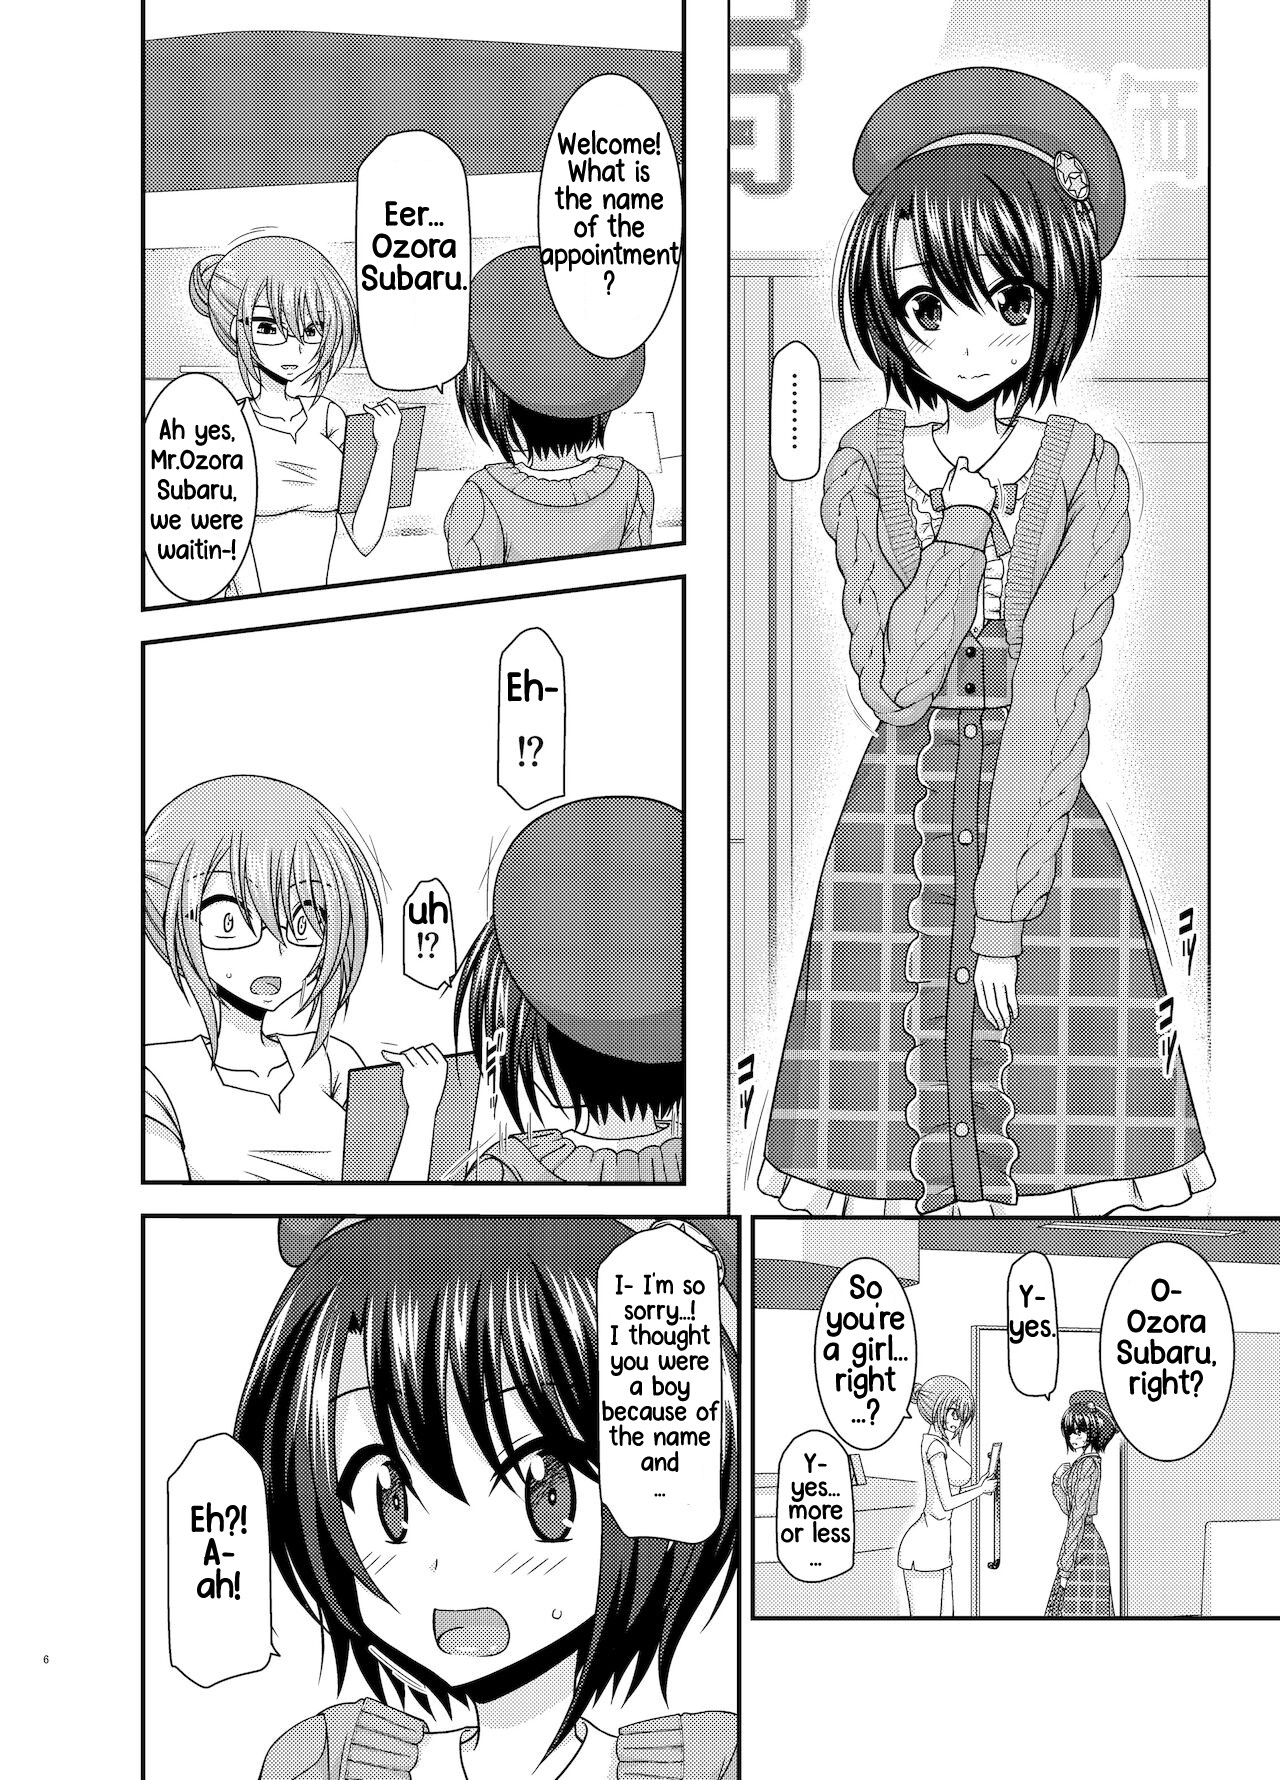 Hentai Manga Comic-The Story of a Vtuber Who Went To a Massage Parlor Only To End Up Getting Fucked After She Was Mistaken For a Boy --Chapter 3-3